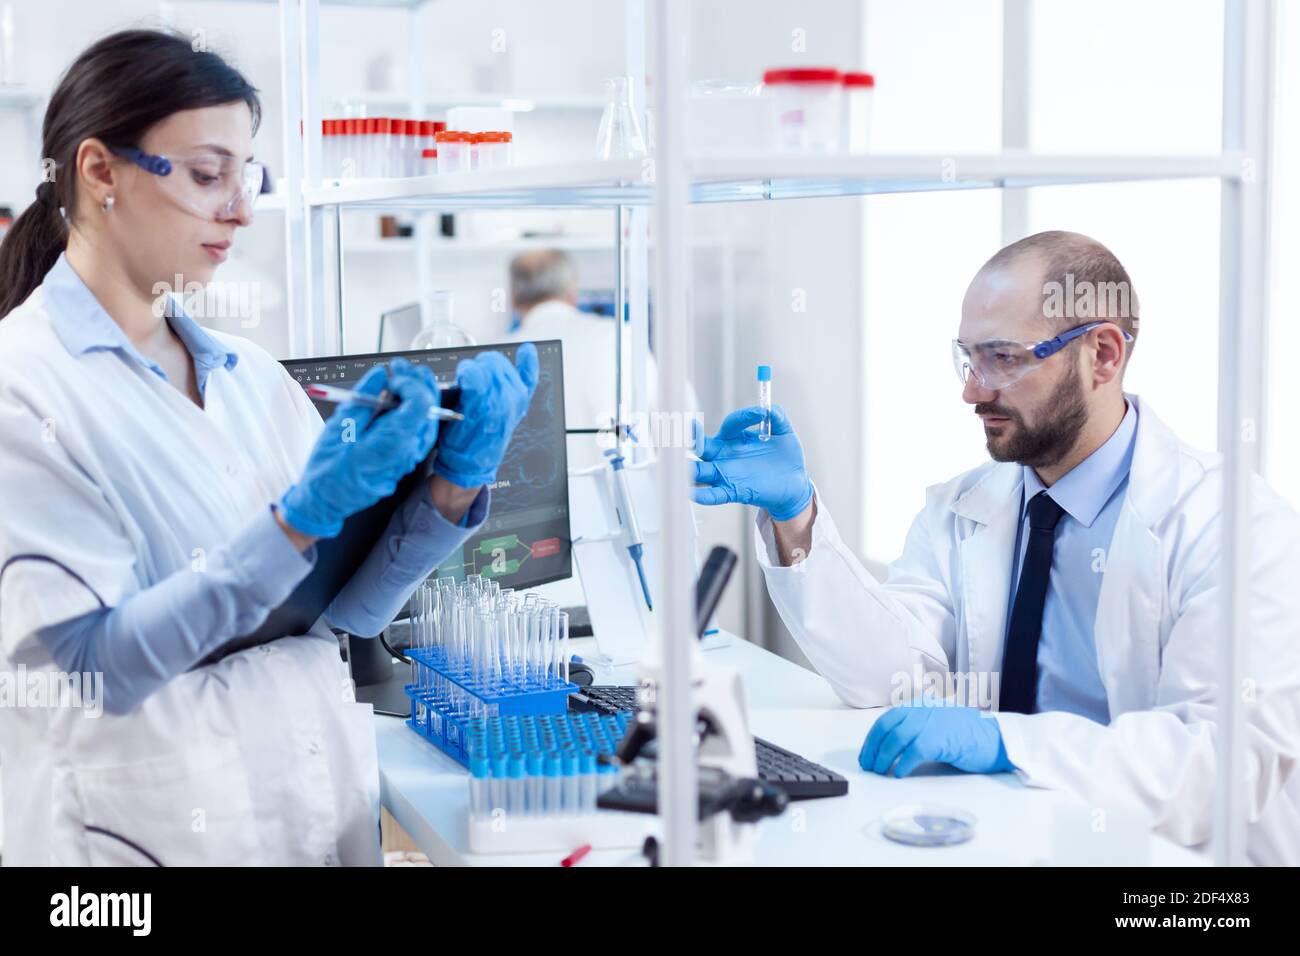 Group of scientist conducting and engineering genetic material analysis. Team of chemical chemists working together in sterile microbiology lab doing research. Stock Photo